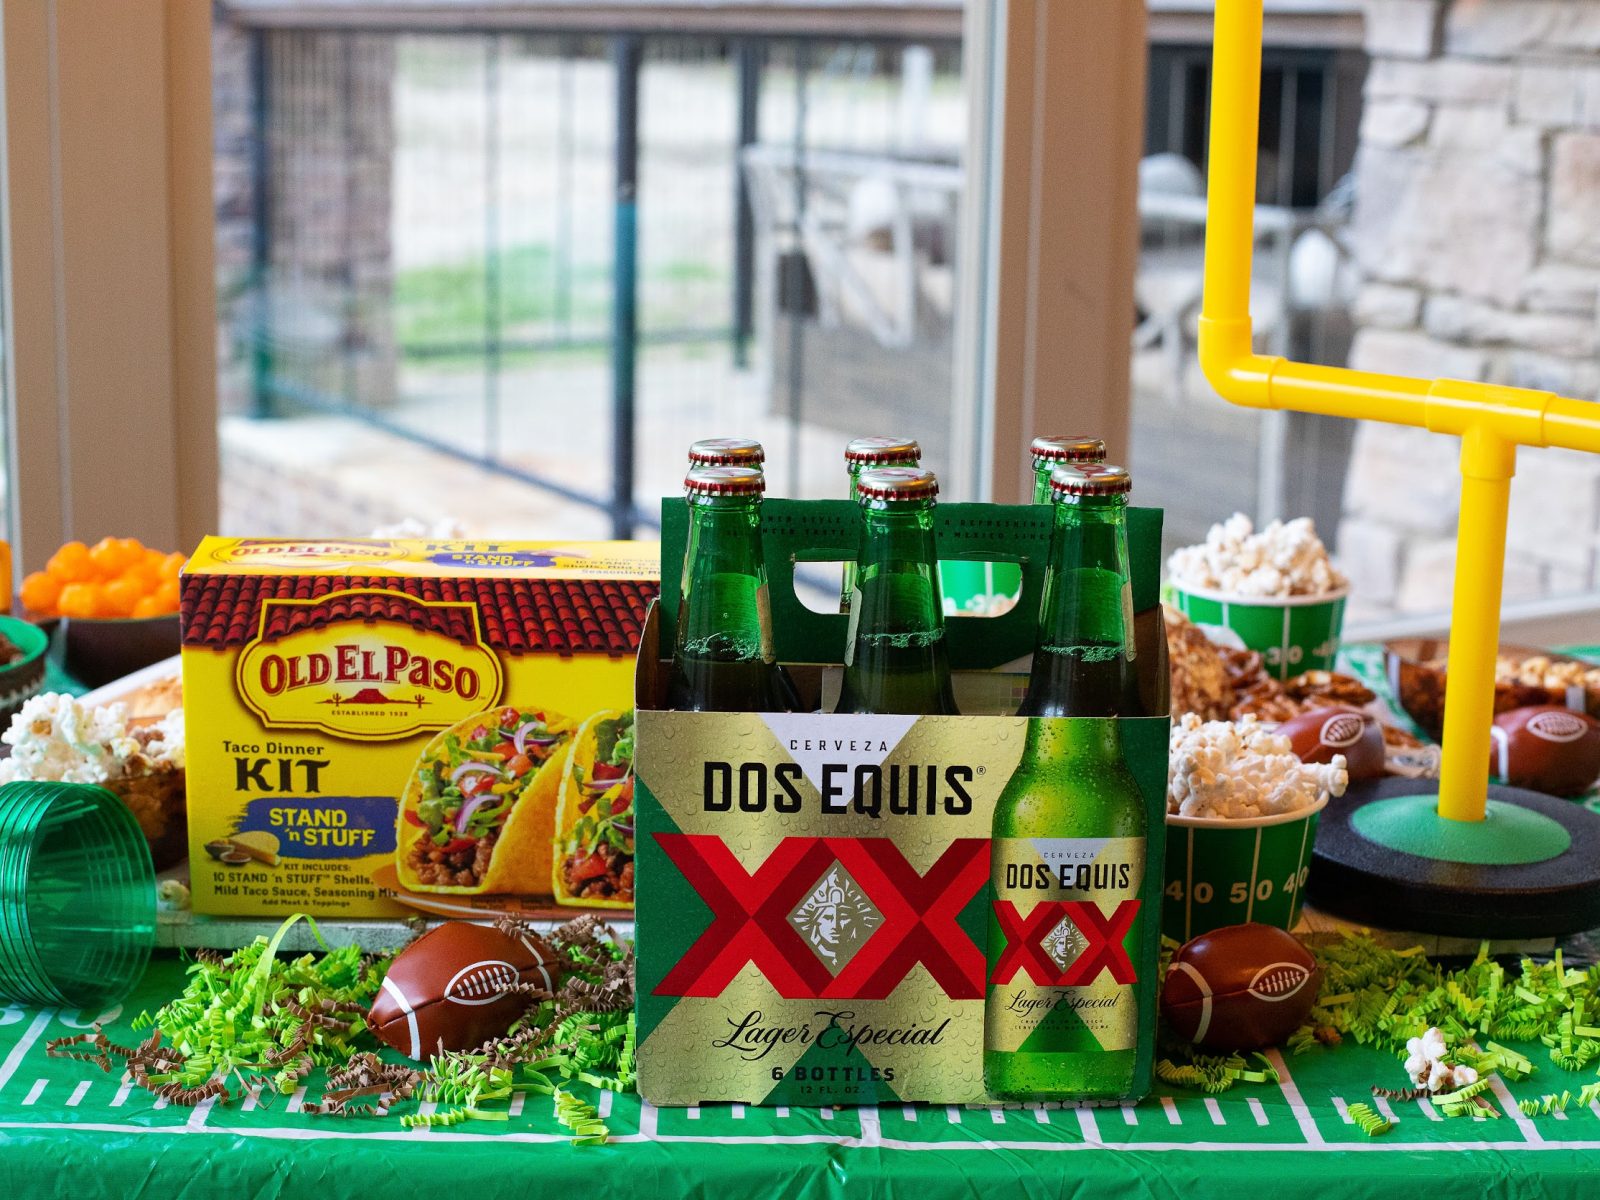 Still Time To Enter To Win Tickets To A Pro Football Game –  Enter The Dos Equis & Old El Paso Sweepstakes ($100 Gift Card Prizes Too!)